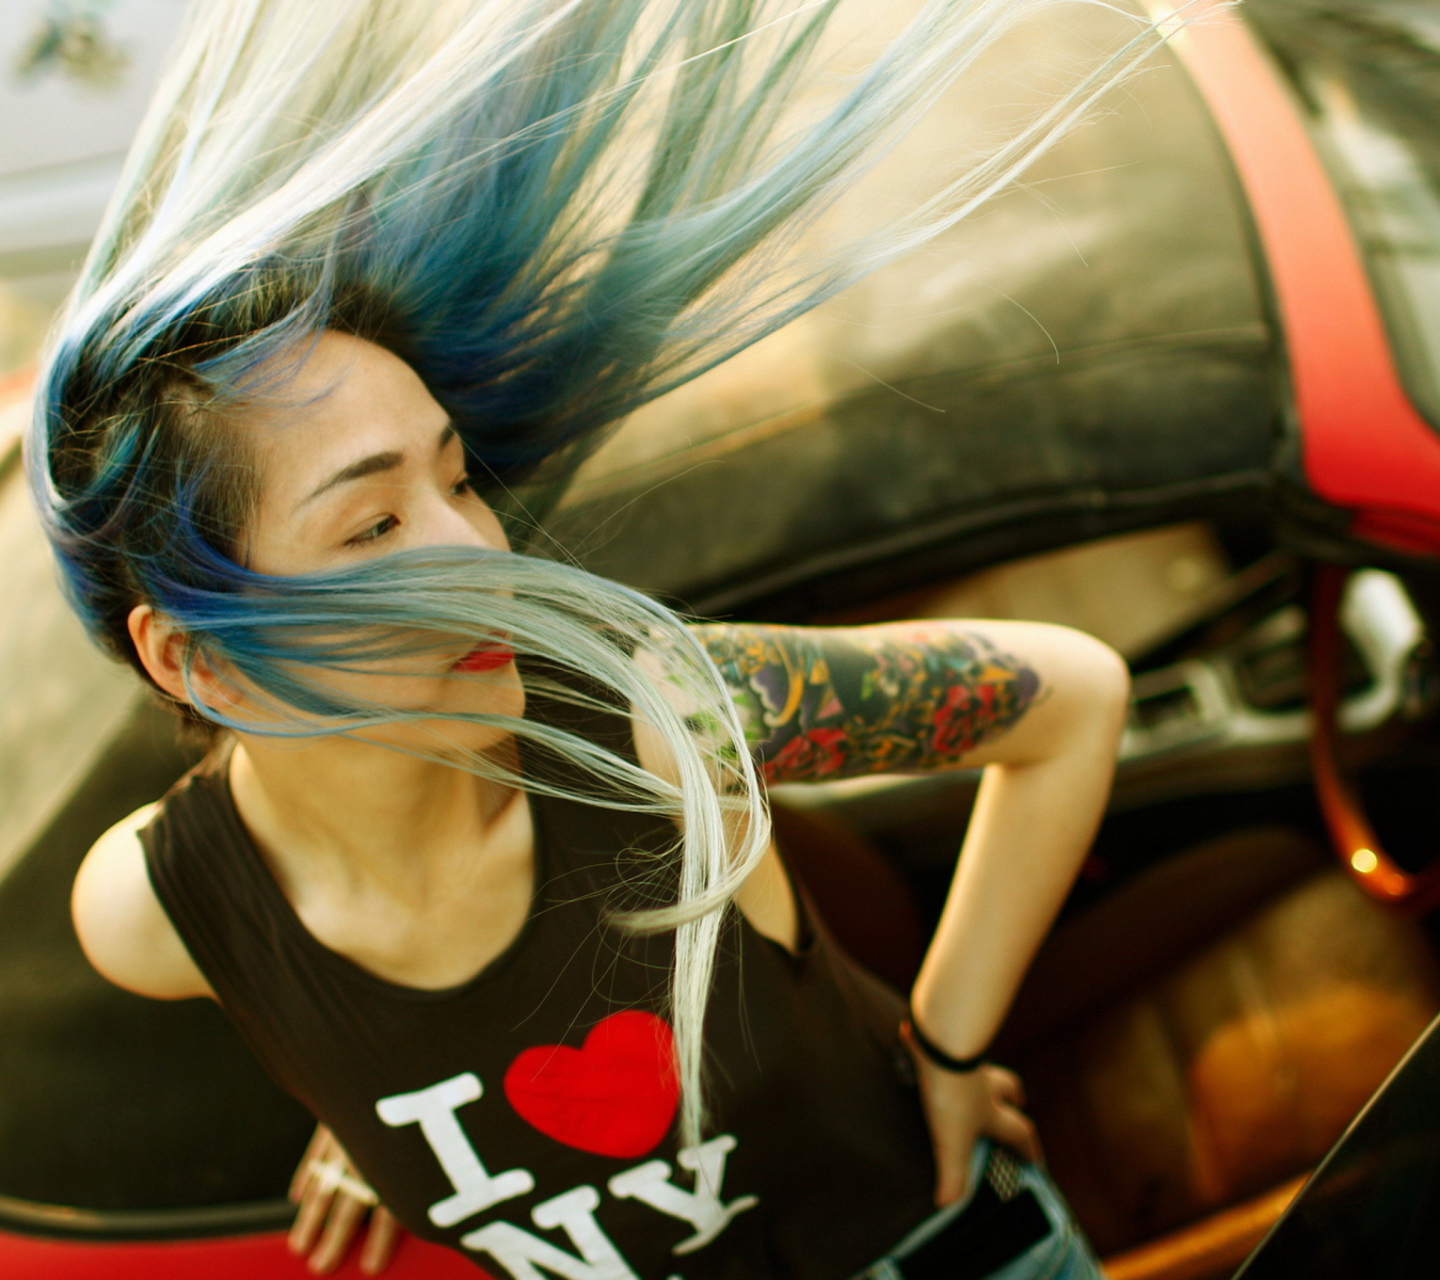 Cool Asian Girl With Blue Hair & I Love NY T-shirt wallpaper 1440x1280